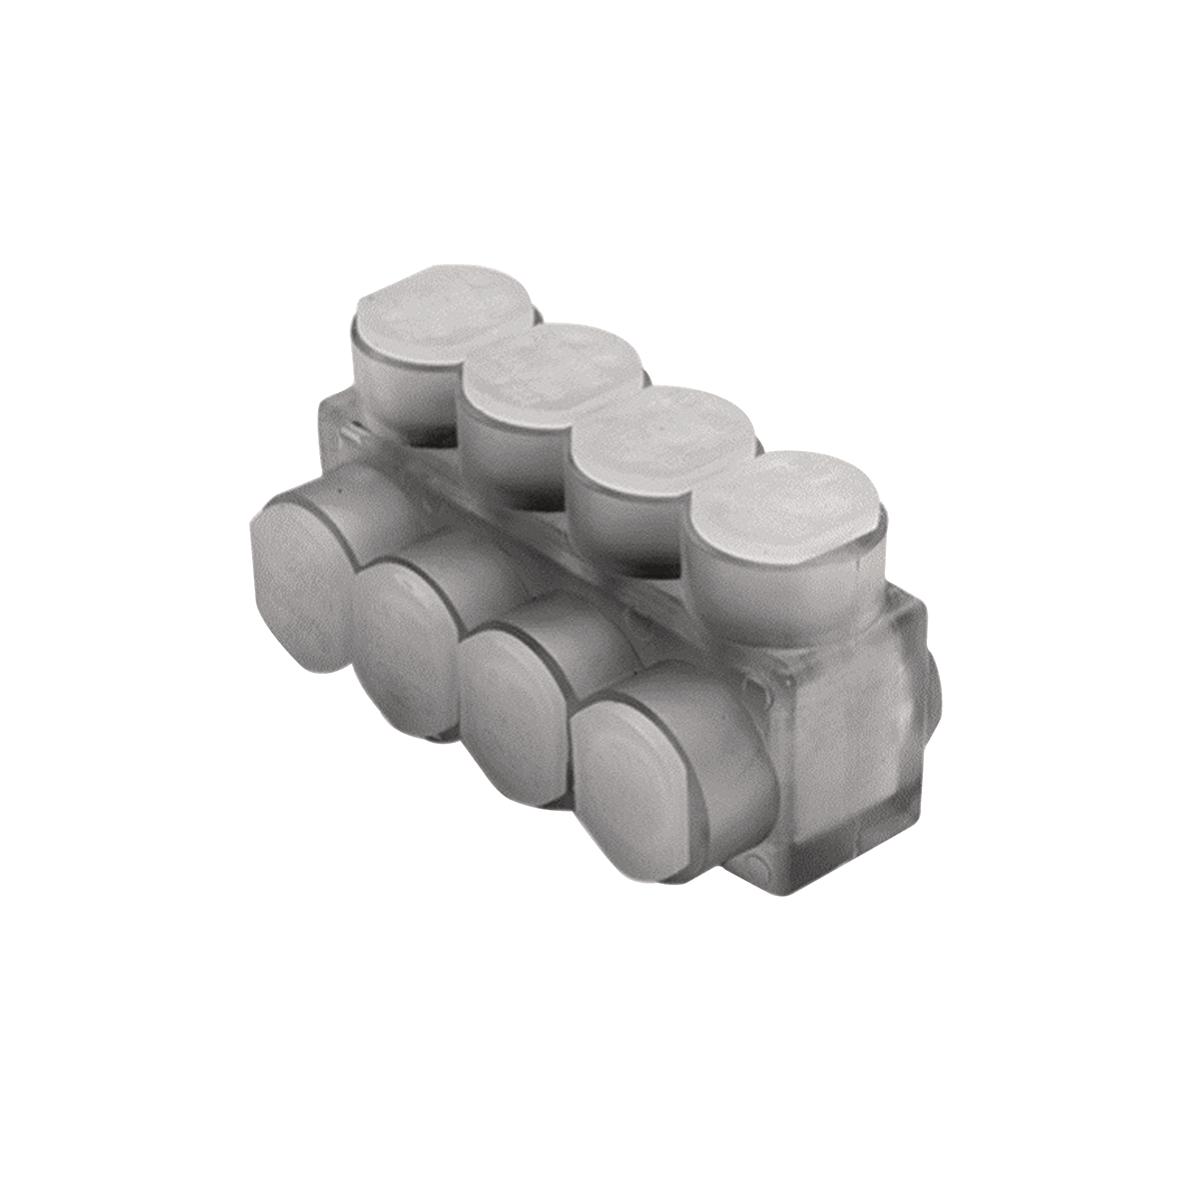 Hubbell BIBD6004MT Aluminum Multiple Tap Connector w/ Mount Holes, Clear Insulated, 4 Port, 2 Sided Entry, 4 AWG-600 kcmil, Al/Cu Rated.  ; Features: The BIBD-MT Series UNITAP Offer The Same Multi-Port Capabilities As The Standard UNITAP Connectors Except These -MT Types Ar